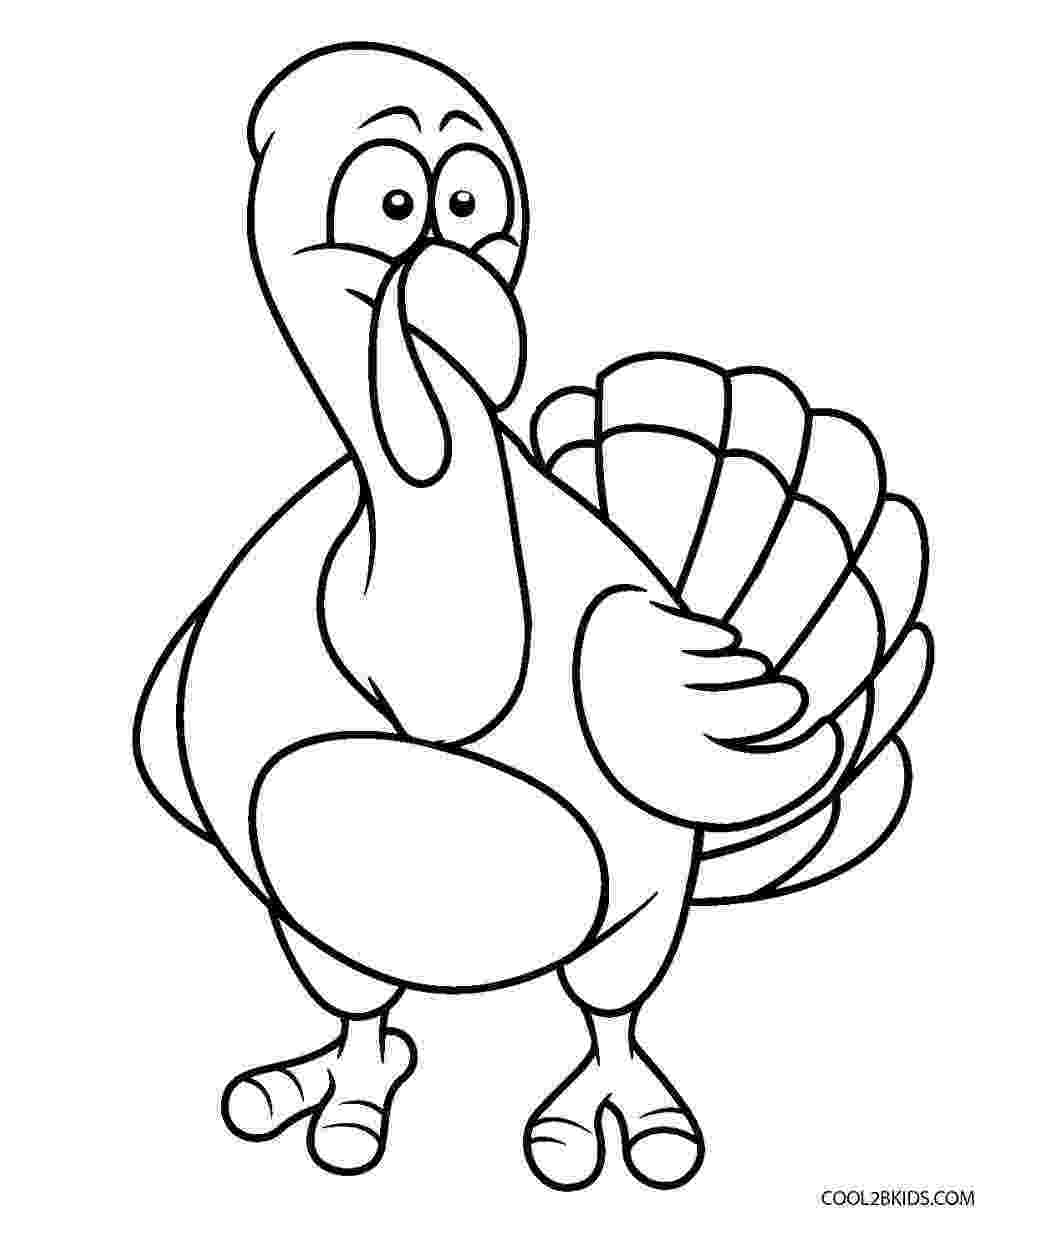 coloring turkey free printable turkey coloring pages for kids cool2bkids coloring turkey 